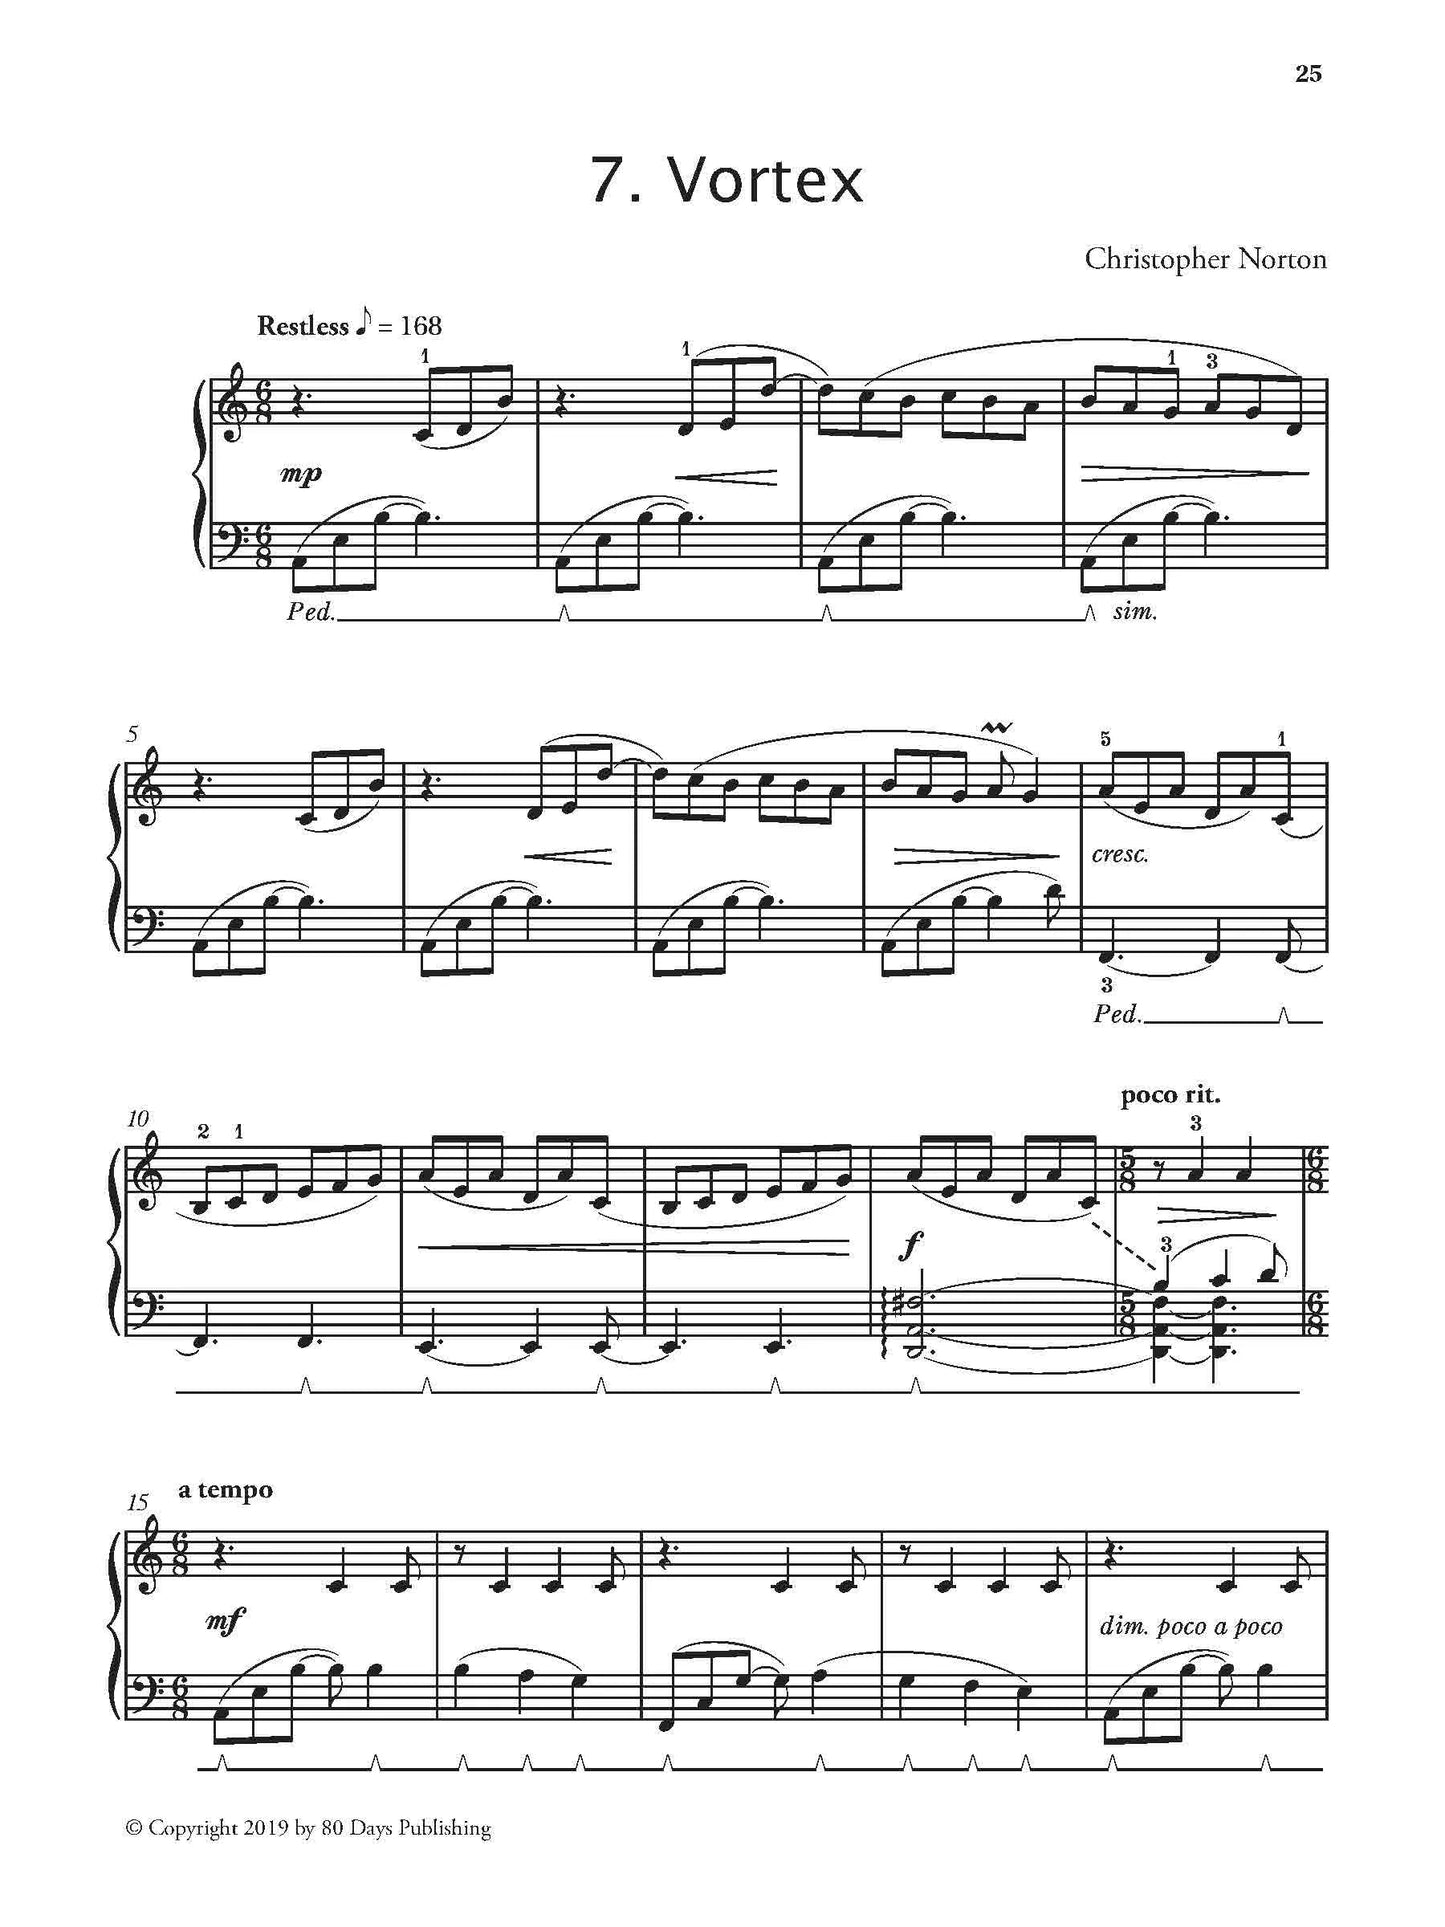 Connections for Piano 9